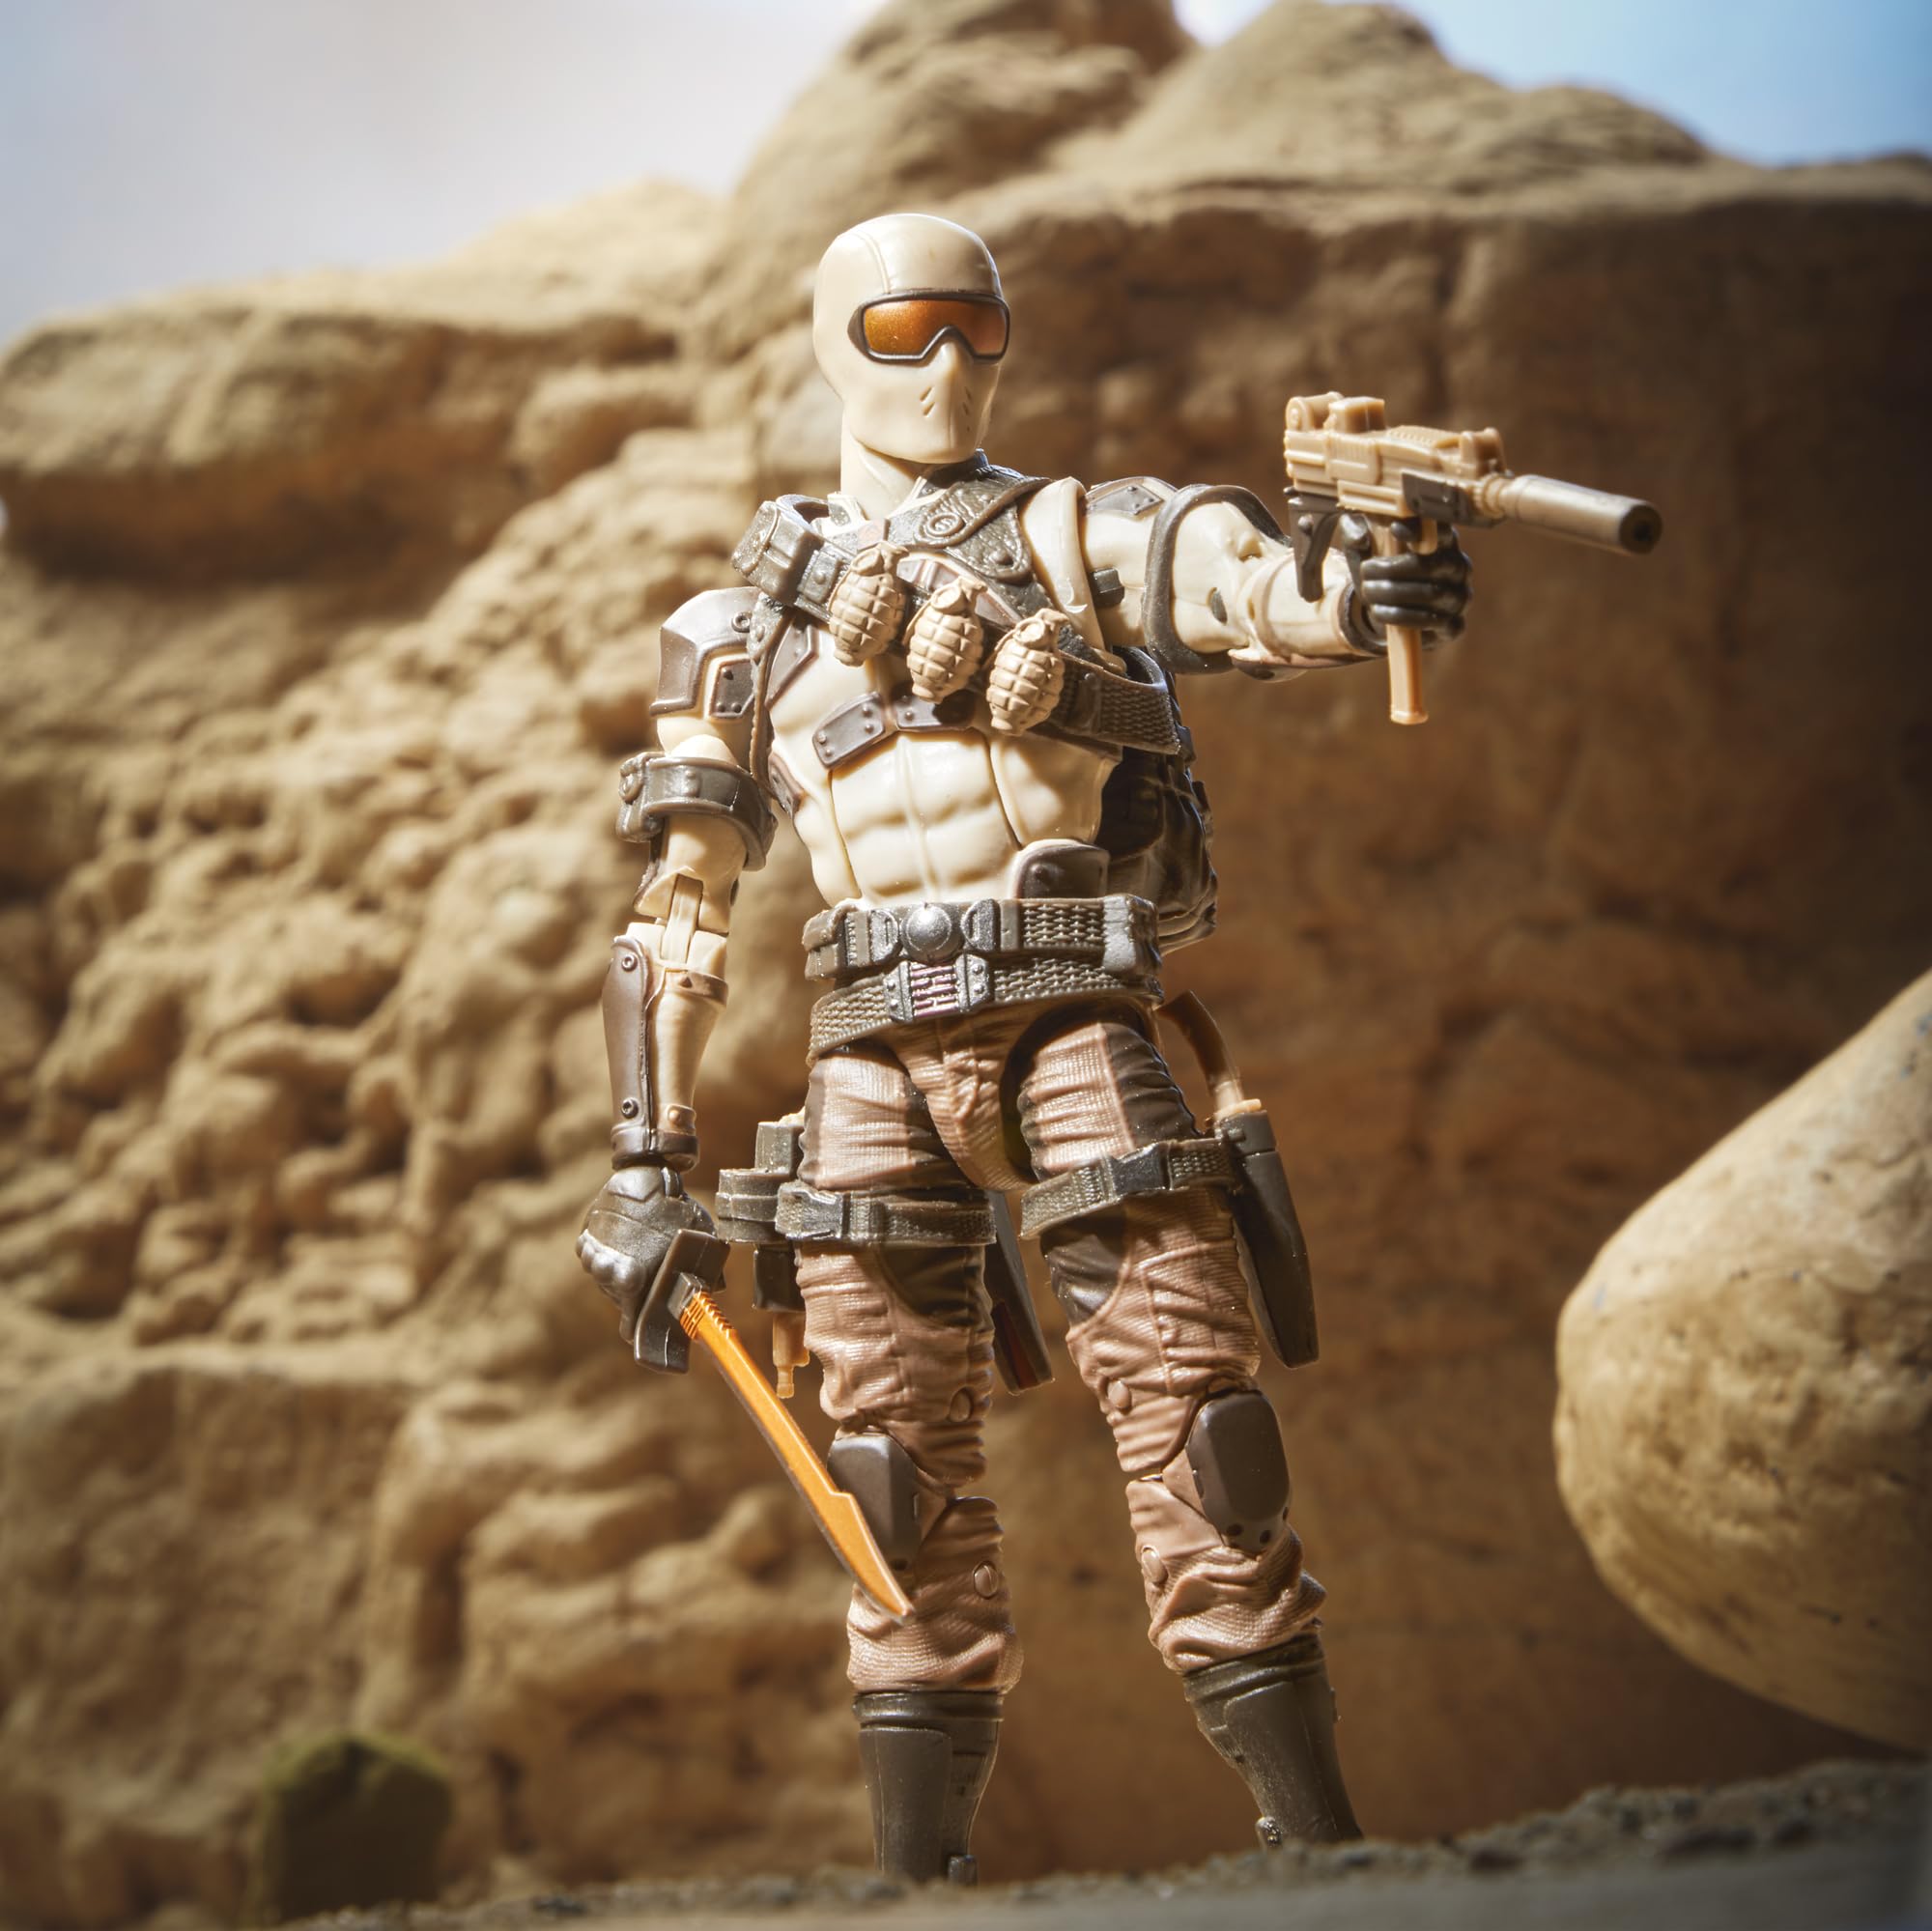 G.I. Joe Classified Series Desert Commando Snake Eyes, Collectible G.I. Joe Action Figures, 92, 6-Inch Action Figures for Boys & Girls, with 9 Accessories